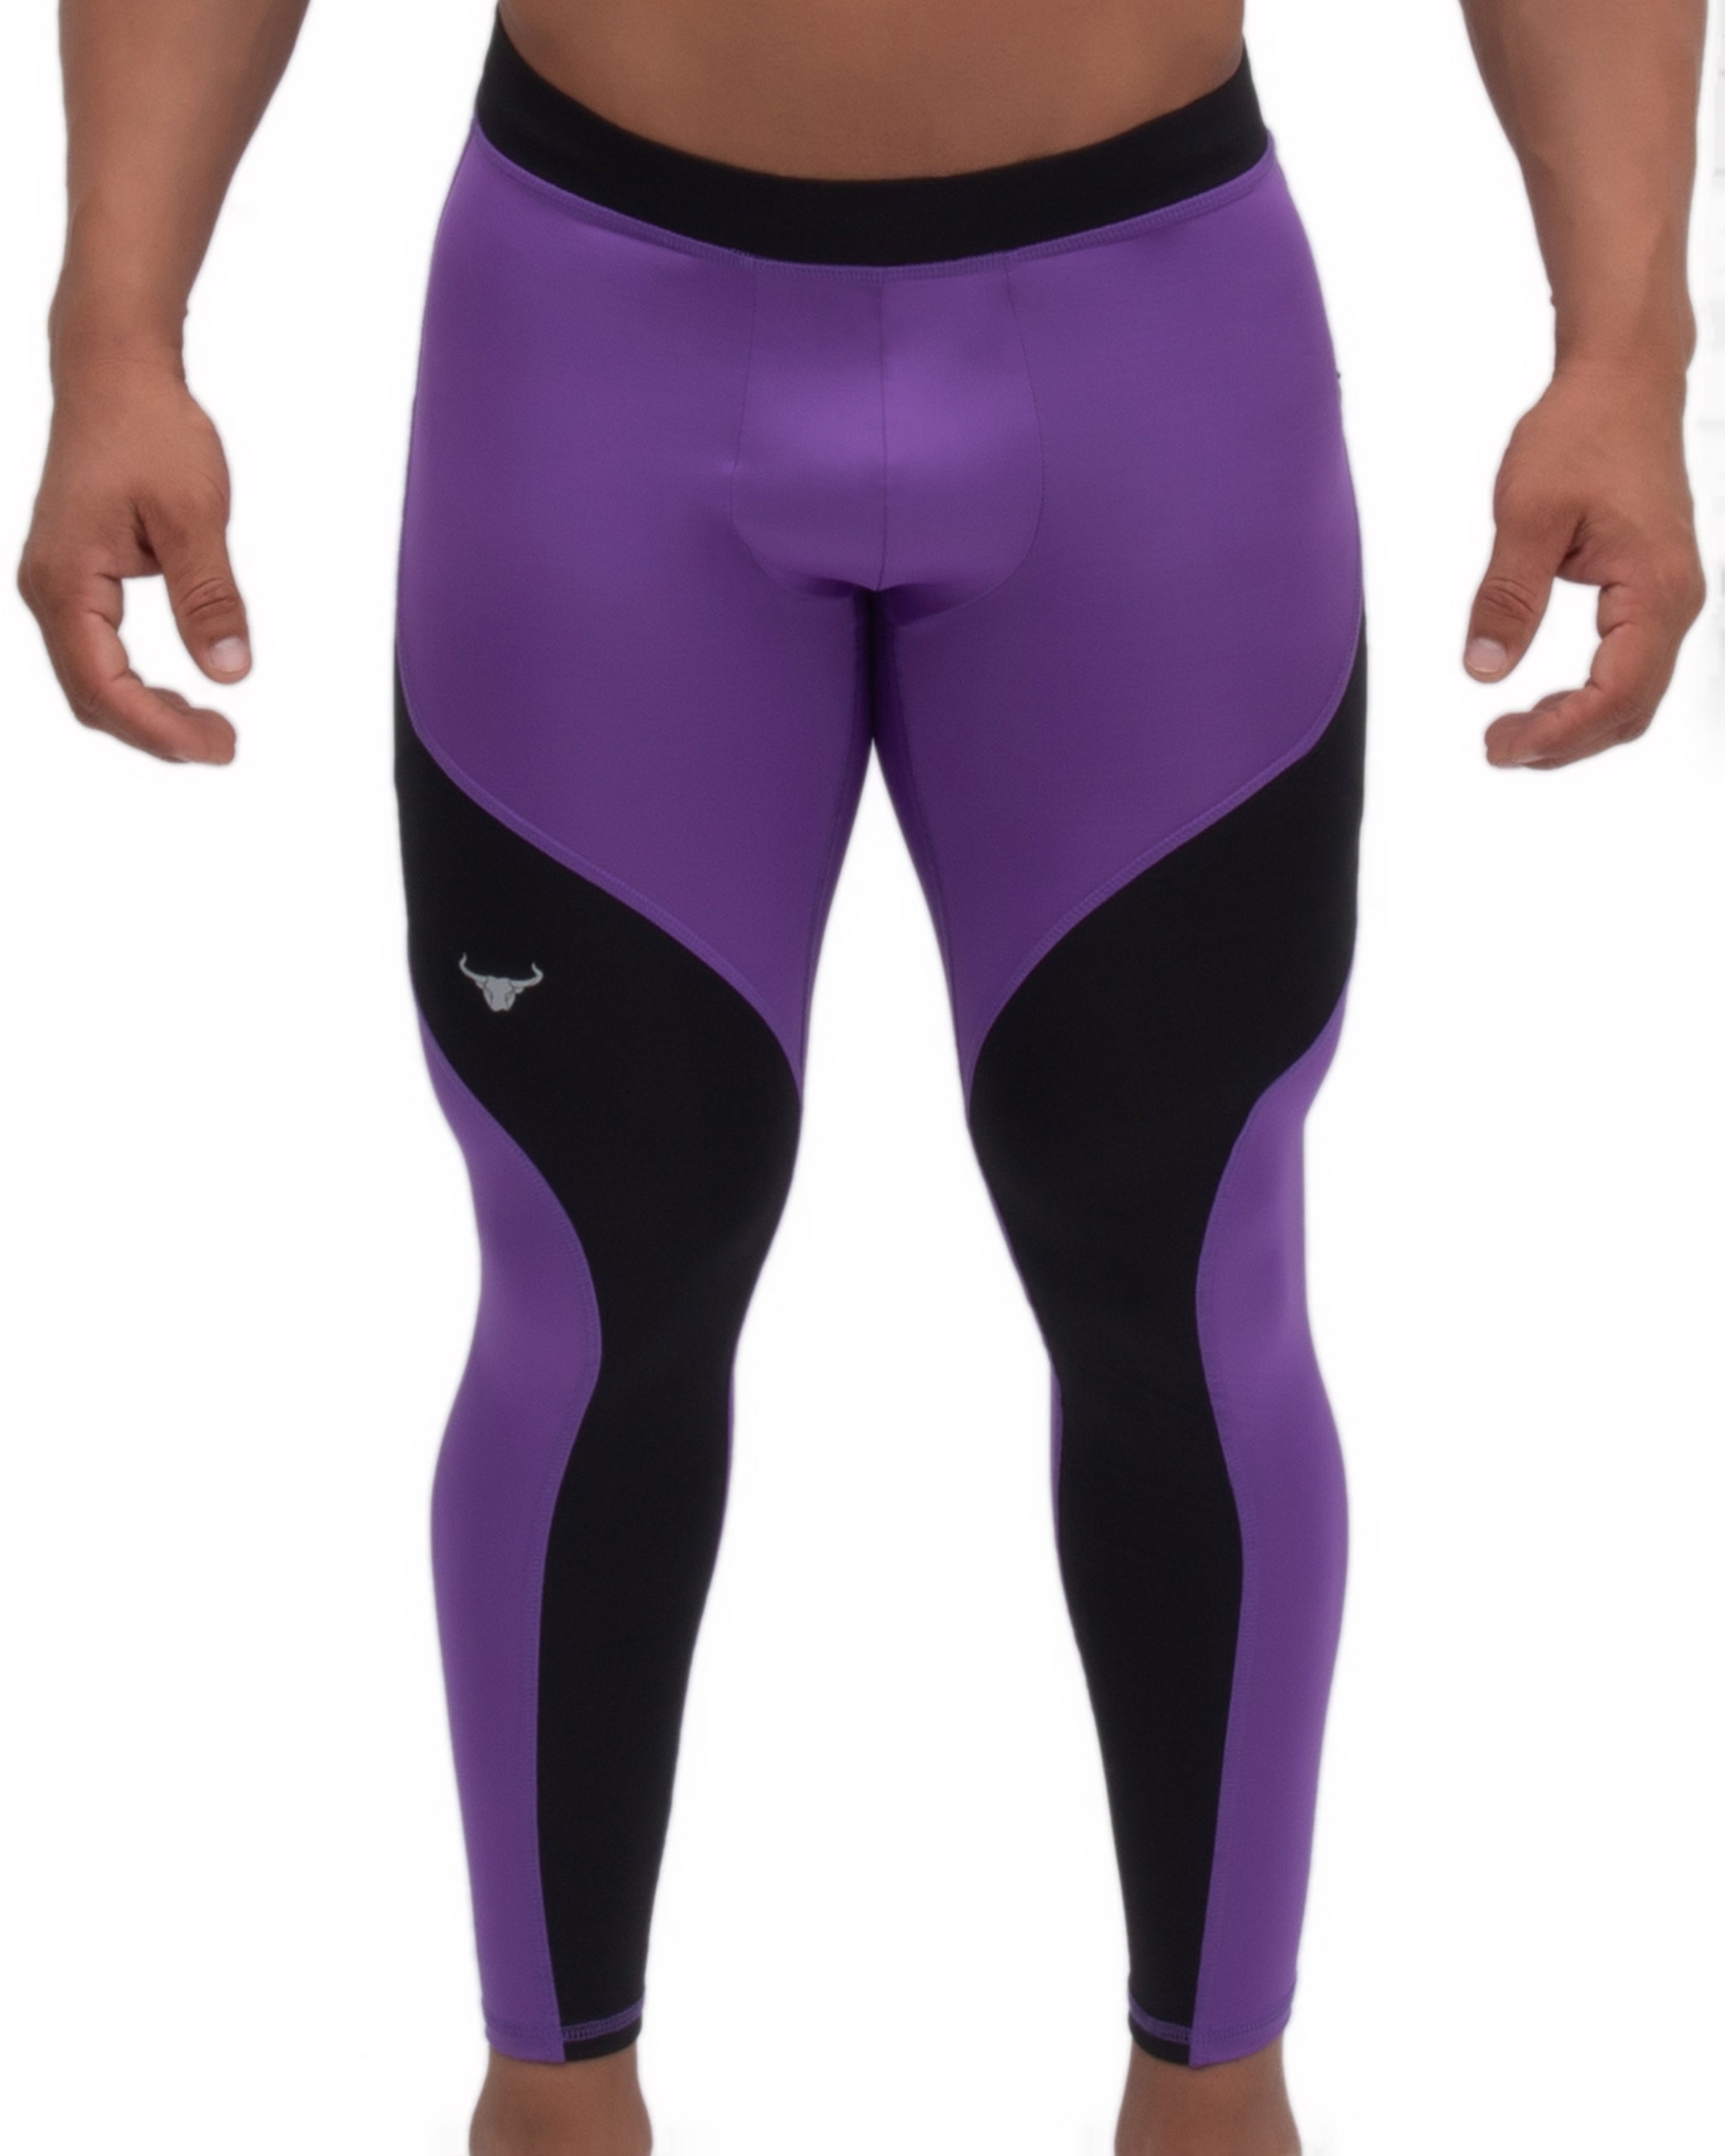 Hue Purple Tights For Men